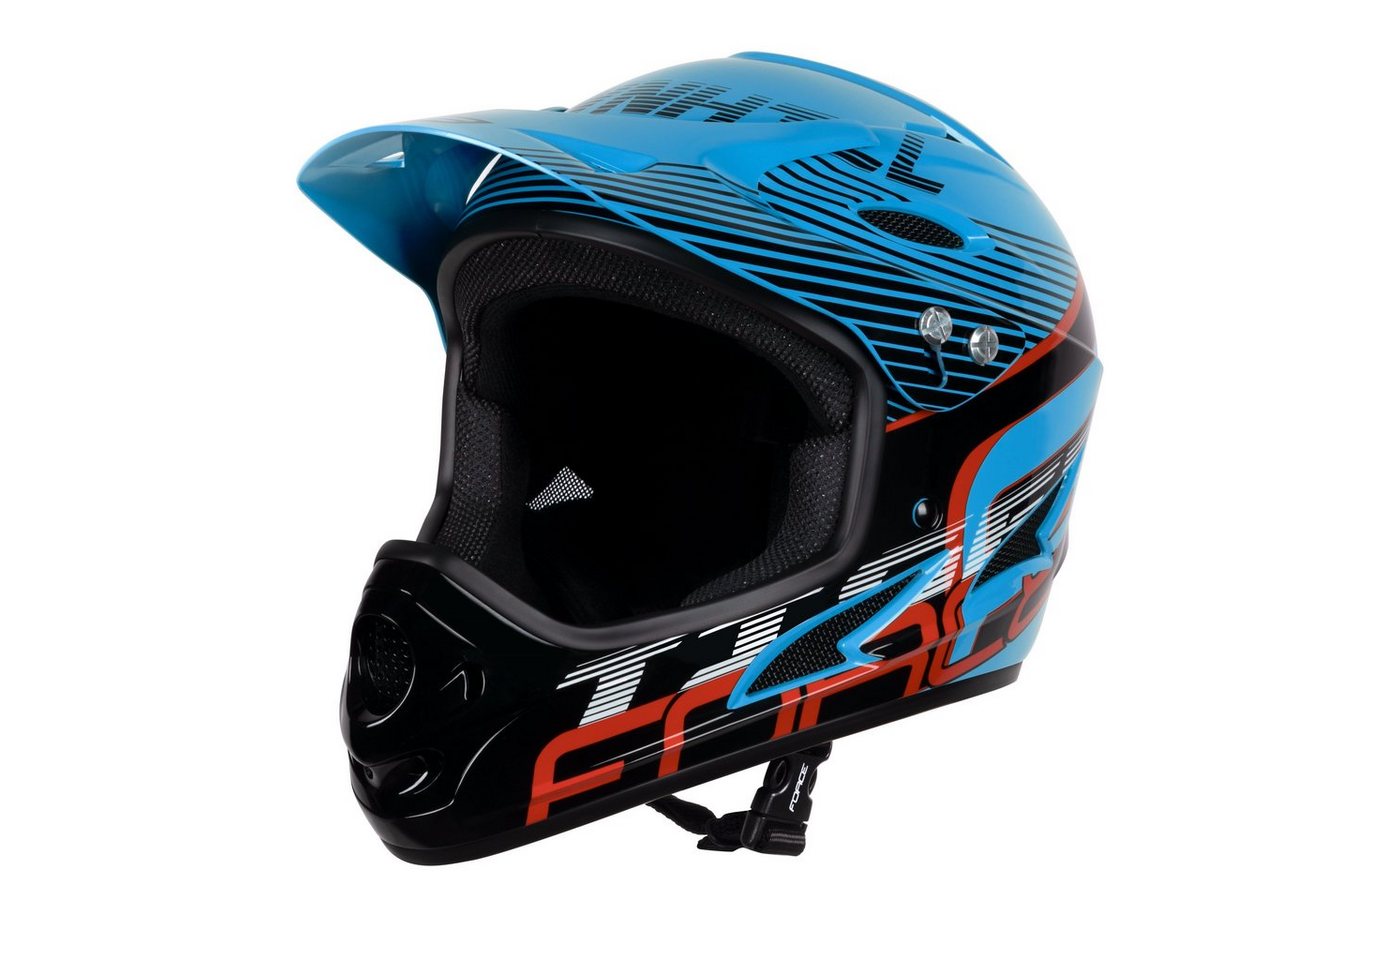 FORCE Fahrradhelm FORCE TIGER Downhill Helm blue-blk-red S-M von Force